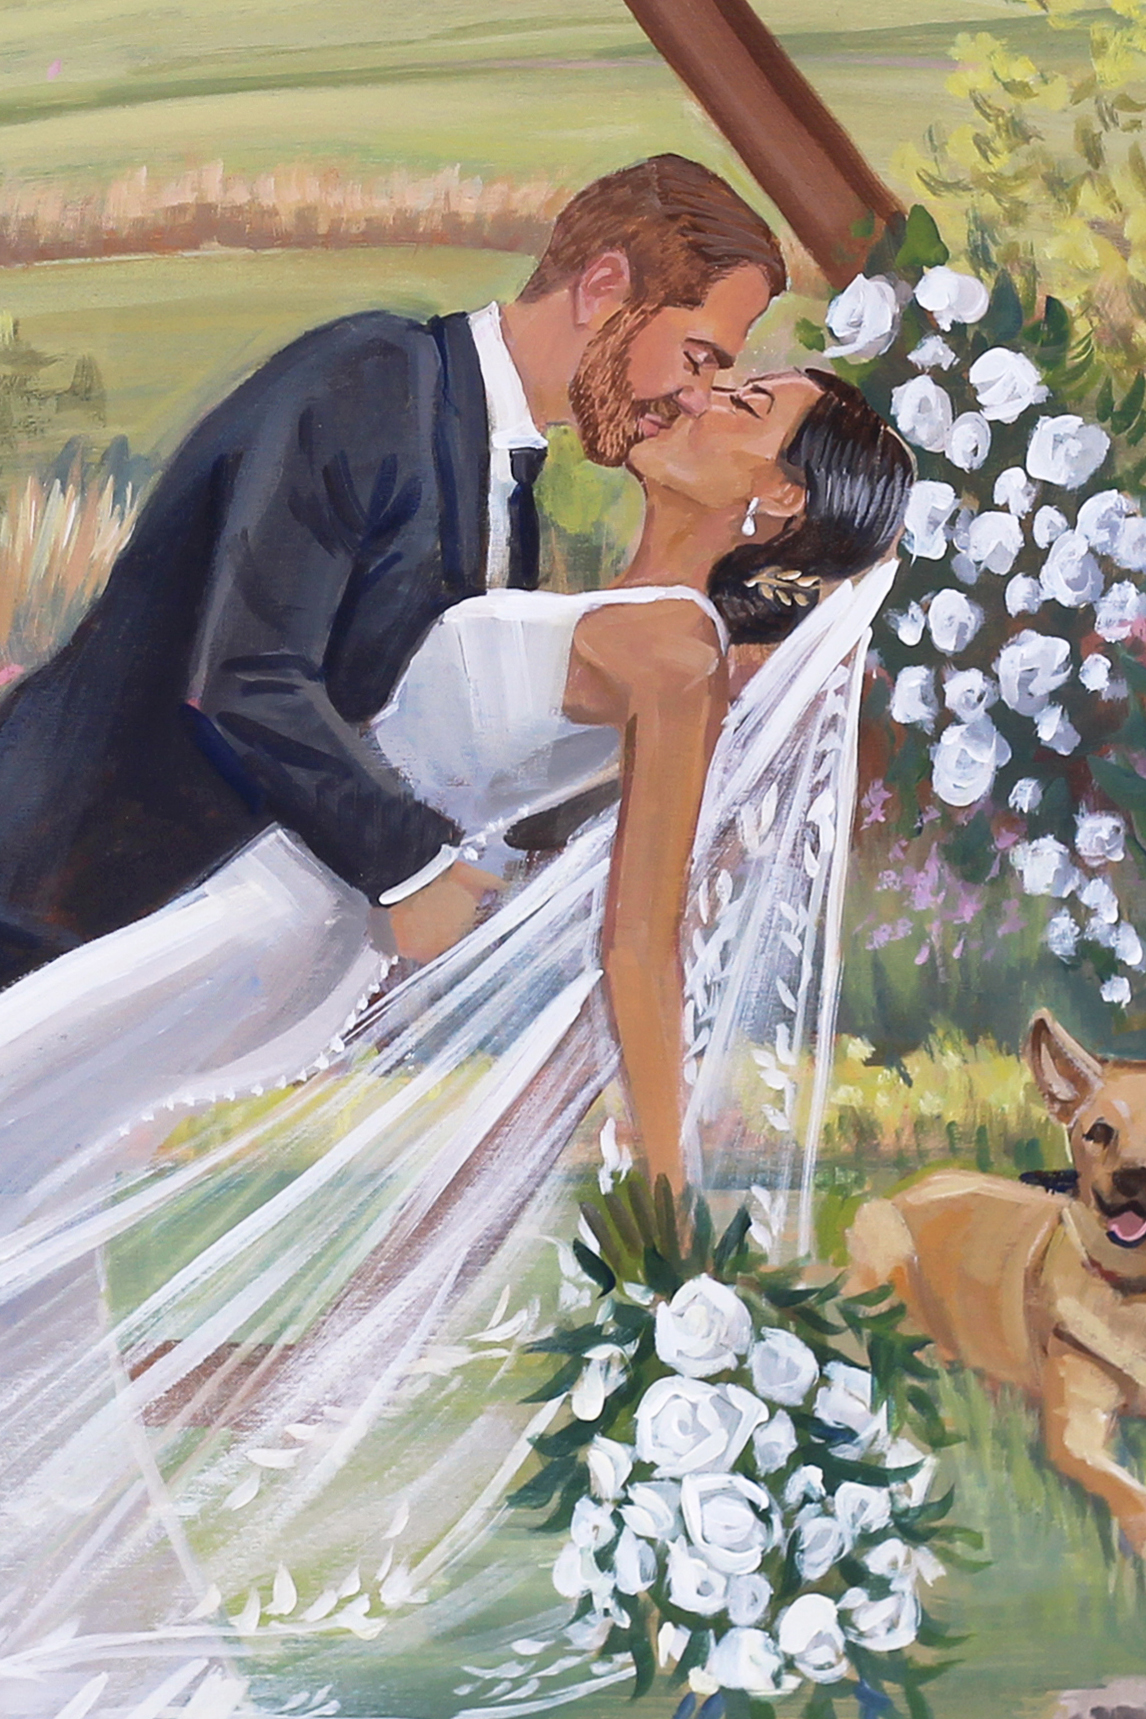 Early Mountain Vineyards Wedding Painting by Live Painter, Ben Keys